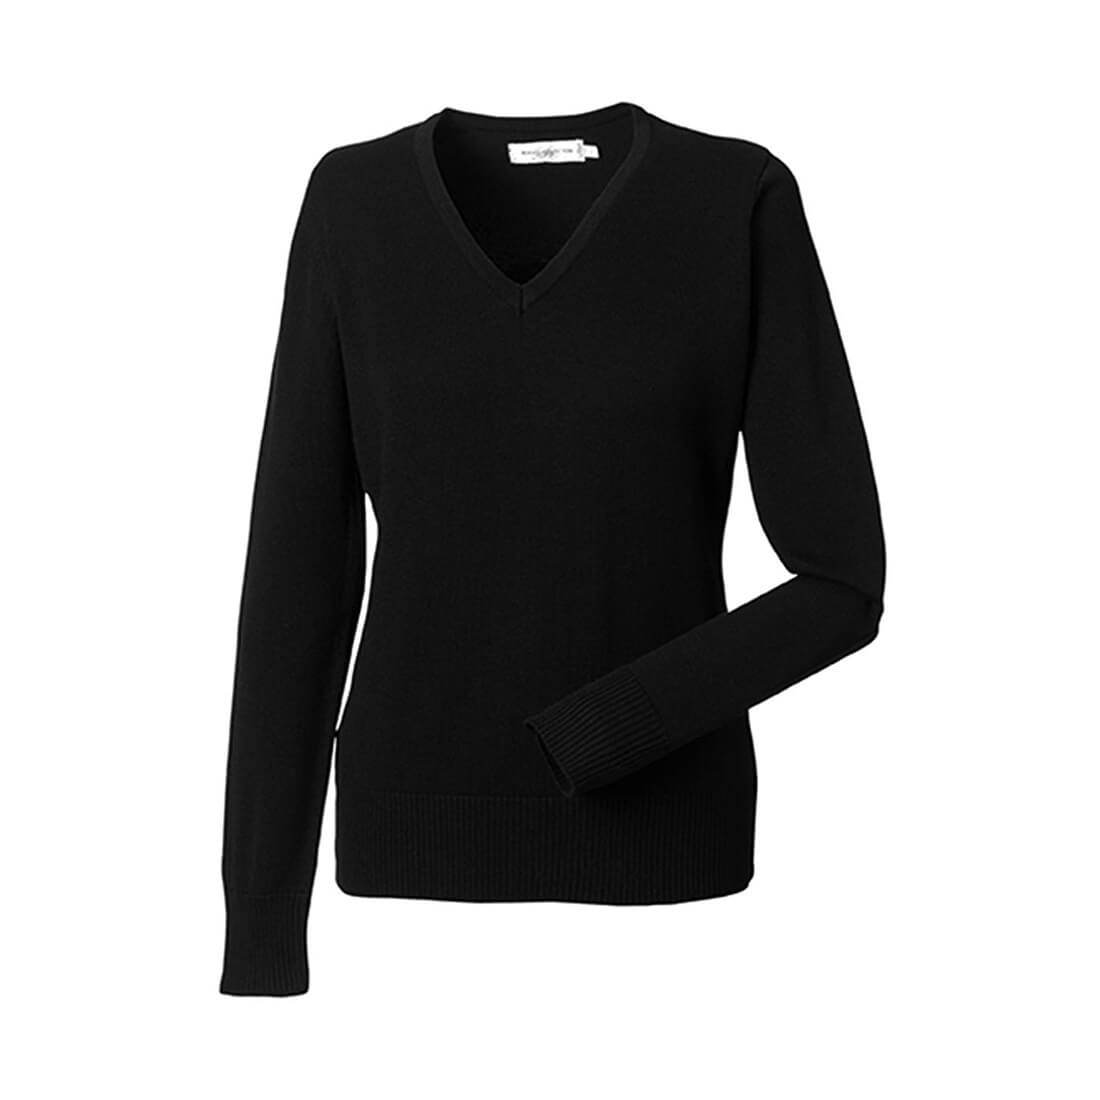 Ladies’ V-Neck Knitted Pullover - Arbeitskleidung